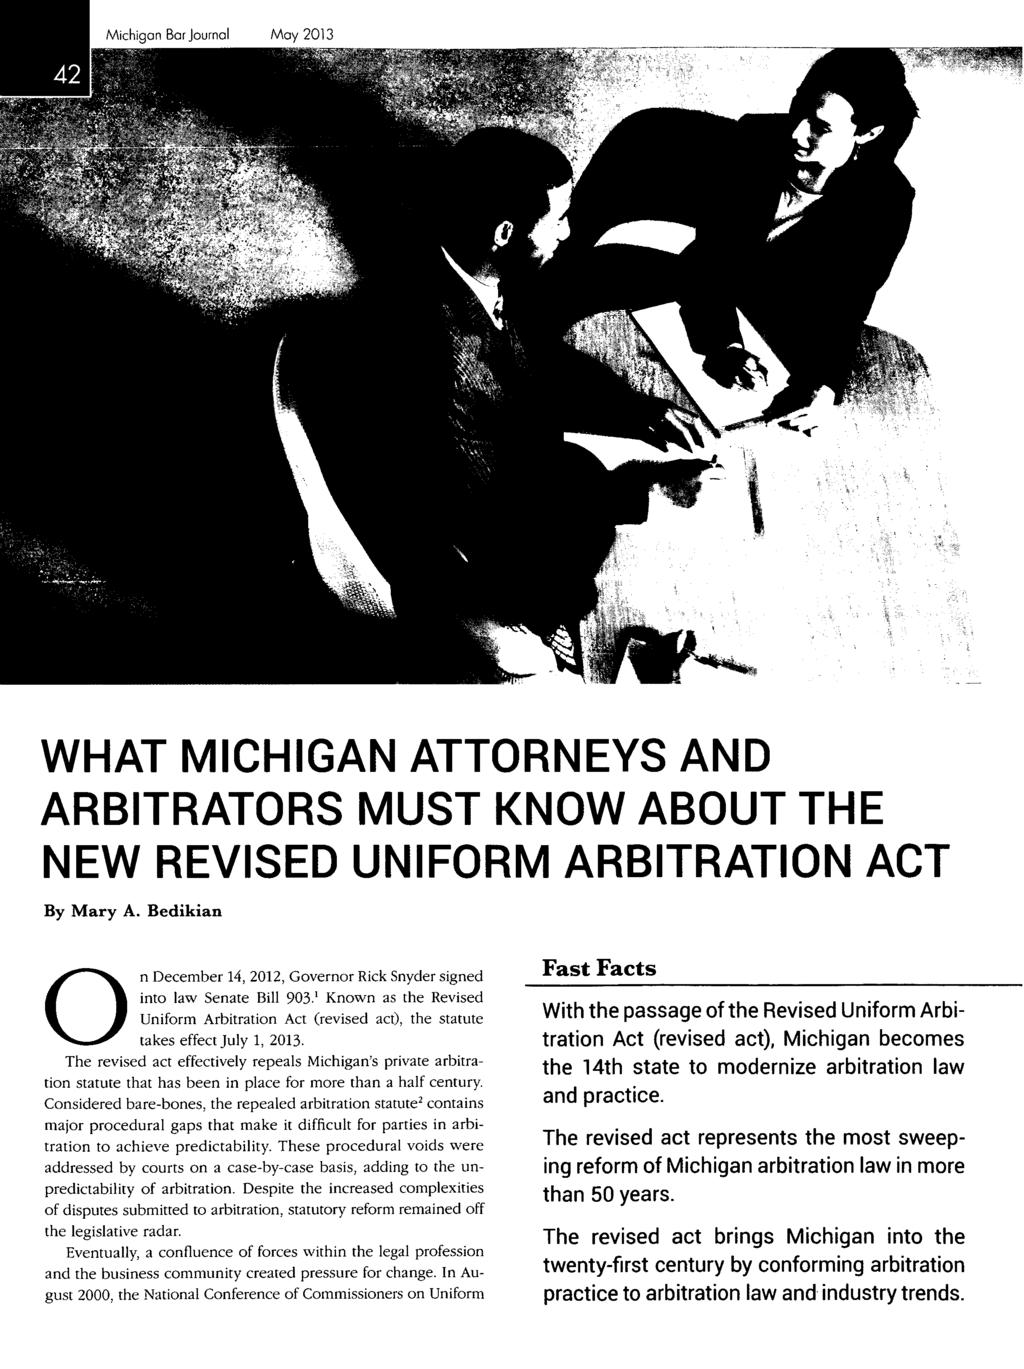 WHAT MICHIGAN ATTORNEYS AND ARBITRATORS MUST KNOW ABOUT THE NEW REVISED UNIFORM ARBITRATION ACT By Mary A. Bedikian On into law Senate Bill 903.